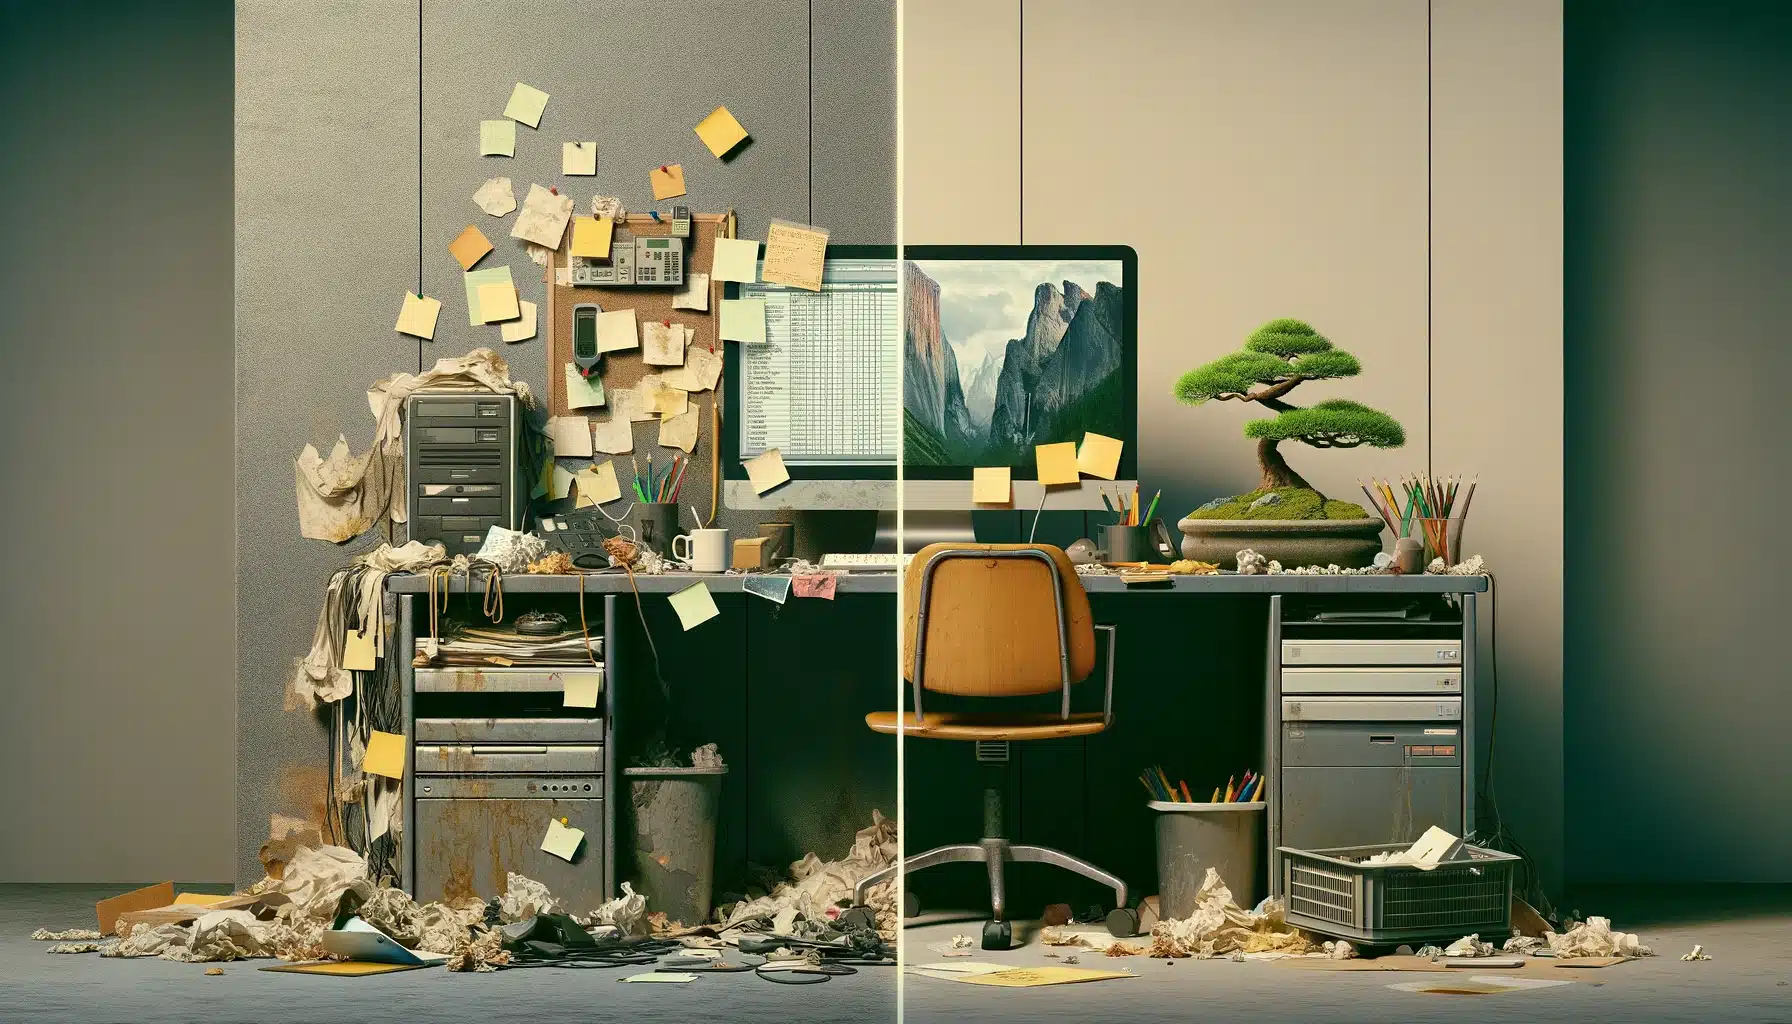 Inspired by vintage computer advertisements, this split-screen image contrasts a cluttered desktop overflowing with digital chaos against a minimalist workspace featuring a single bonsai tree and modern file icons. It reflects the transformative power of AI PDF in creating serene productivity from digital disarray.